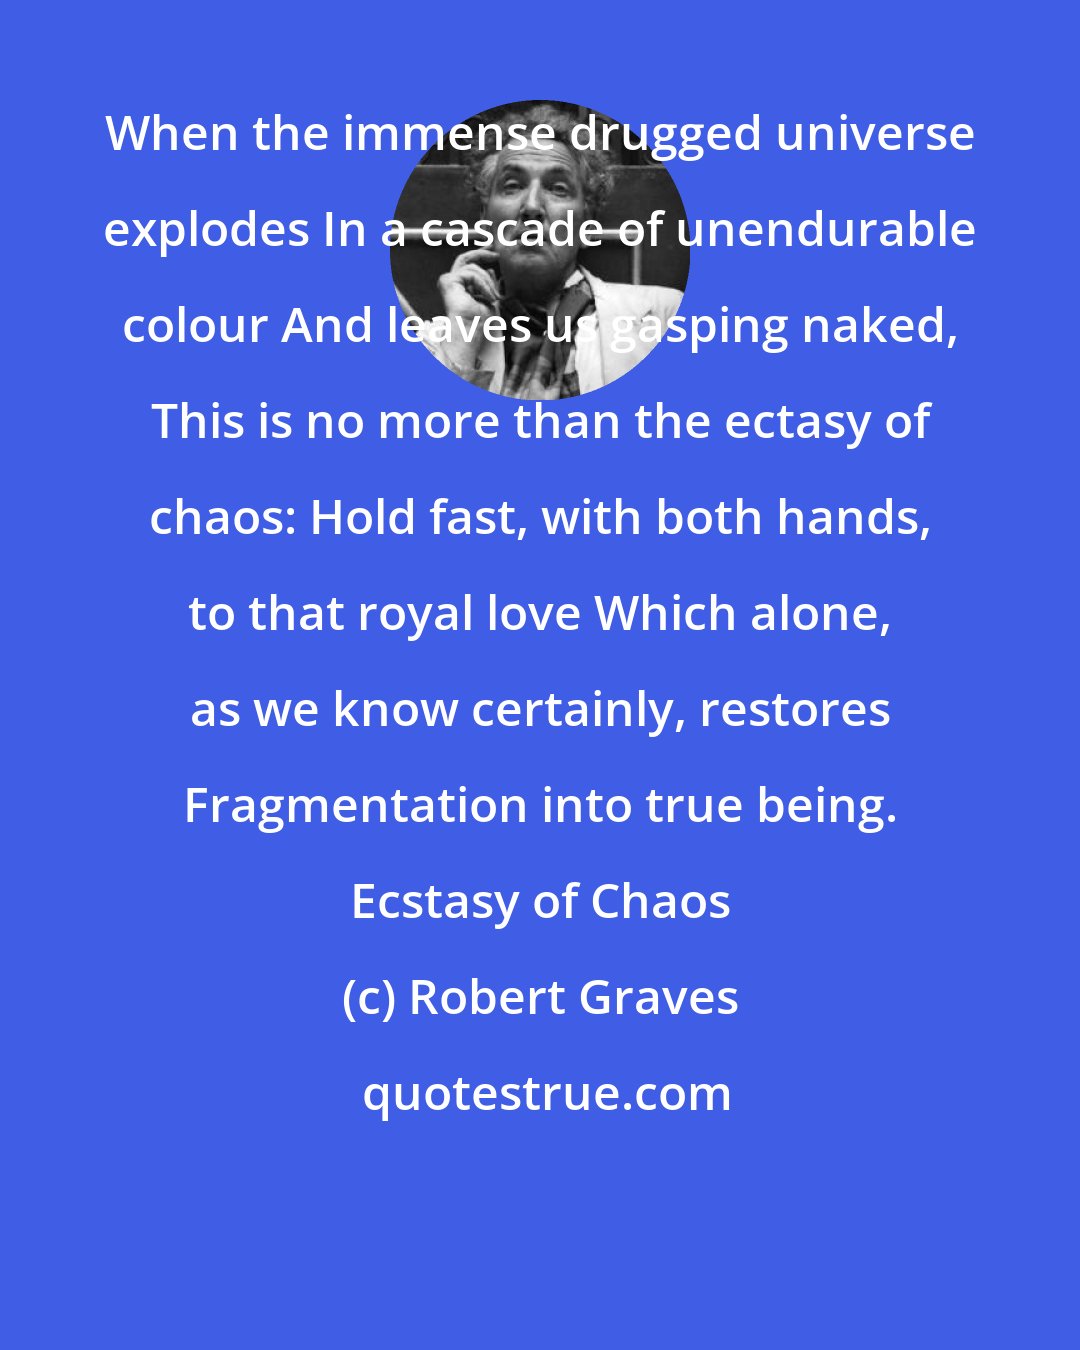 Robert Graves: When the immense drugged universe explodes In a cascade of unendurable colour And leaves us gasping naked, This is no more than the ectasy of chaos: Hold fast, with both hands, to that royal love Which alone, as we know certainly, restores Fragmentation into true being. Ecstasy of Chaos